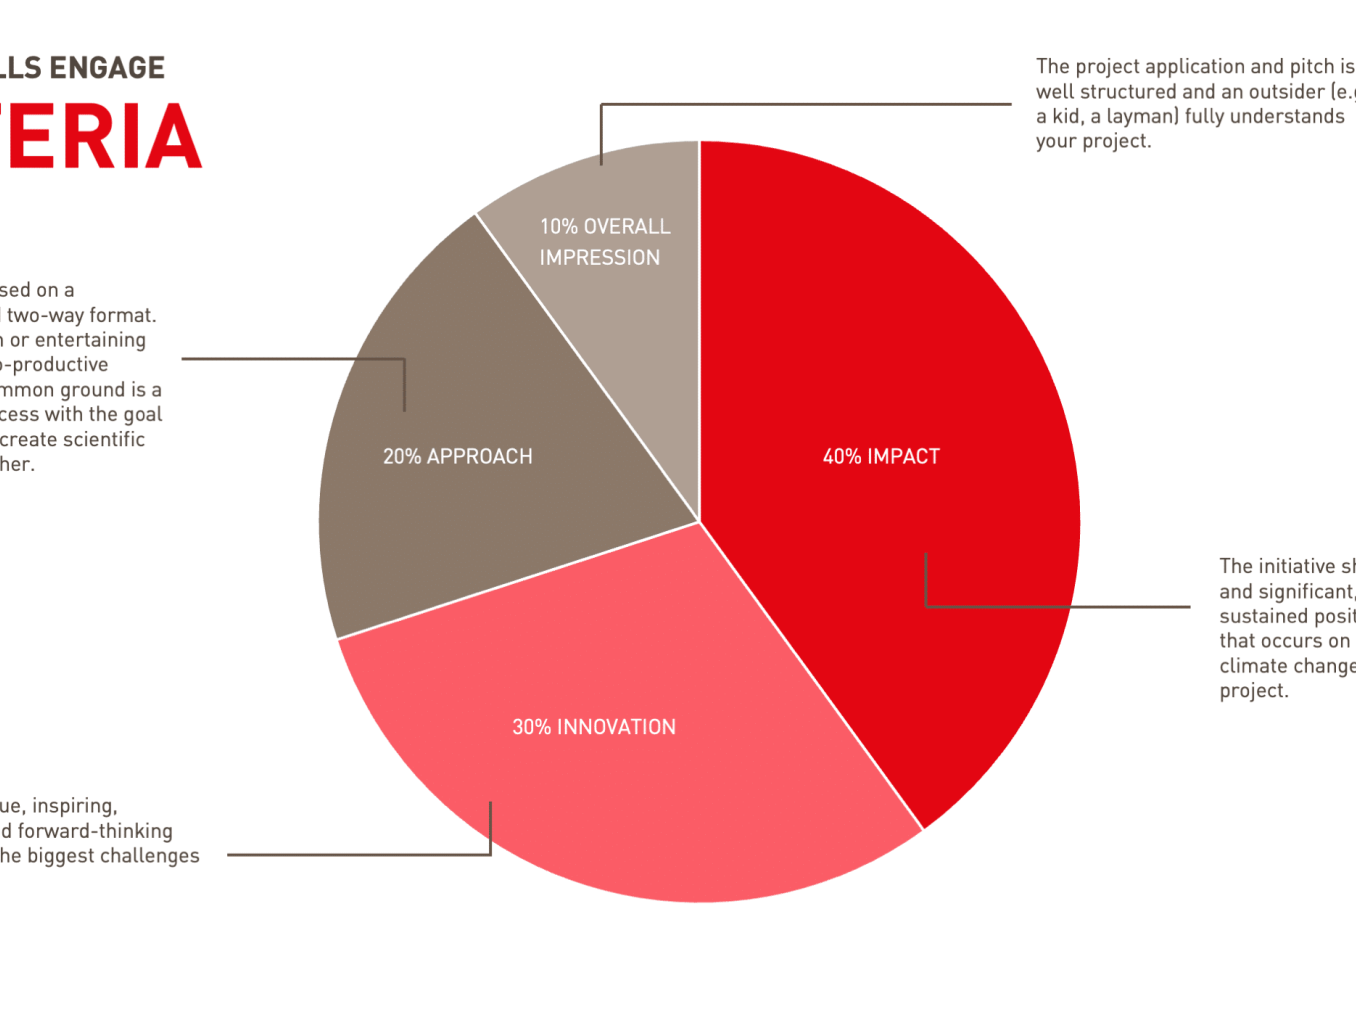 Pie Chart representing selection criteria for Falling Walls Engage